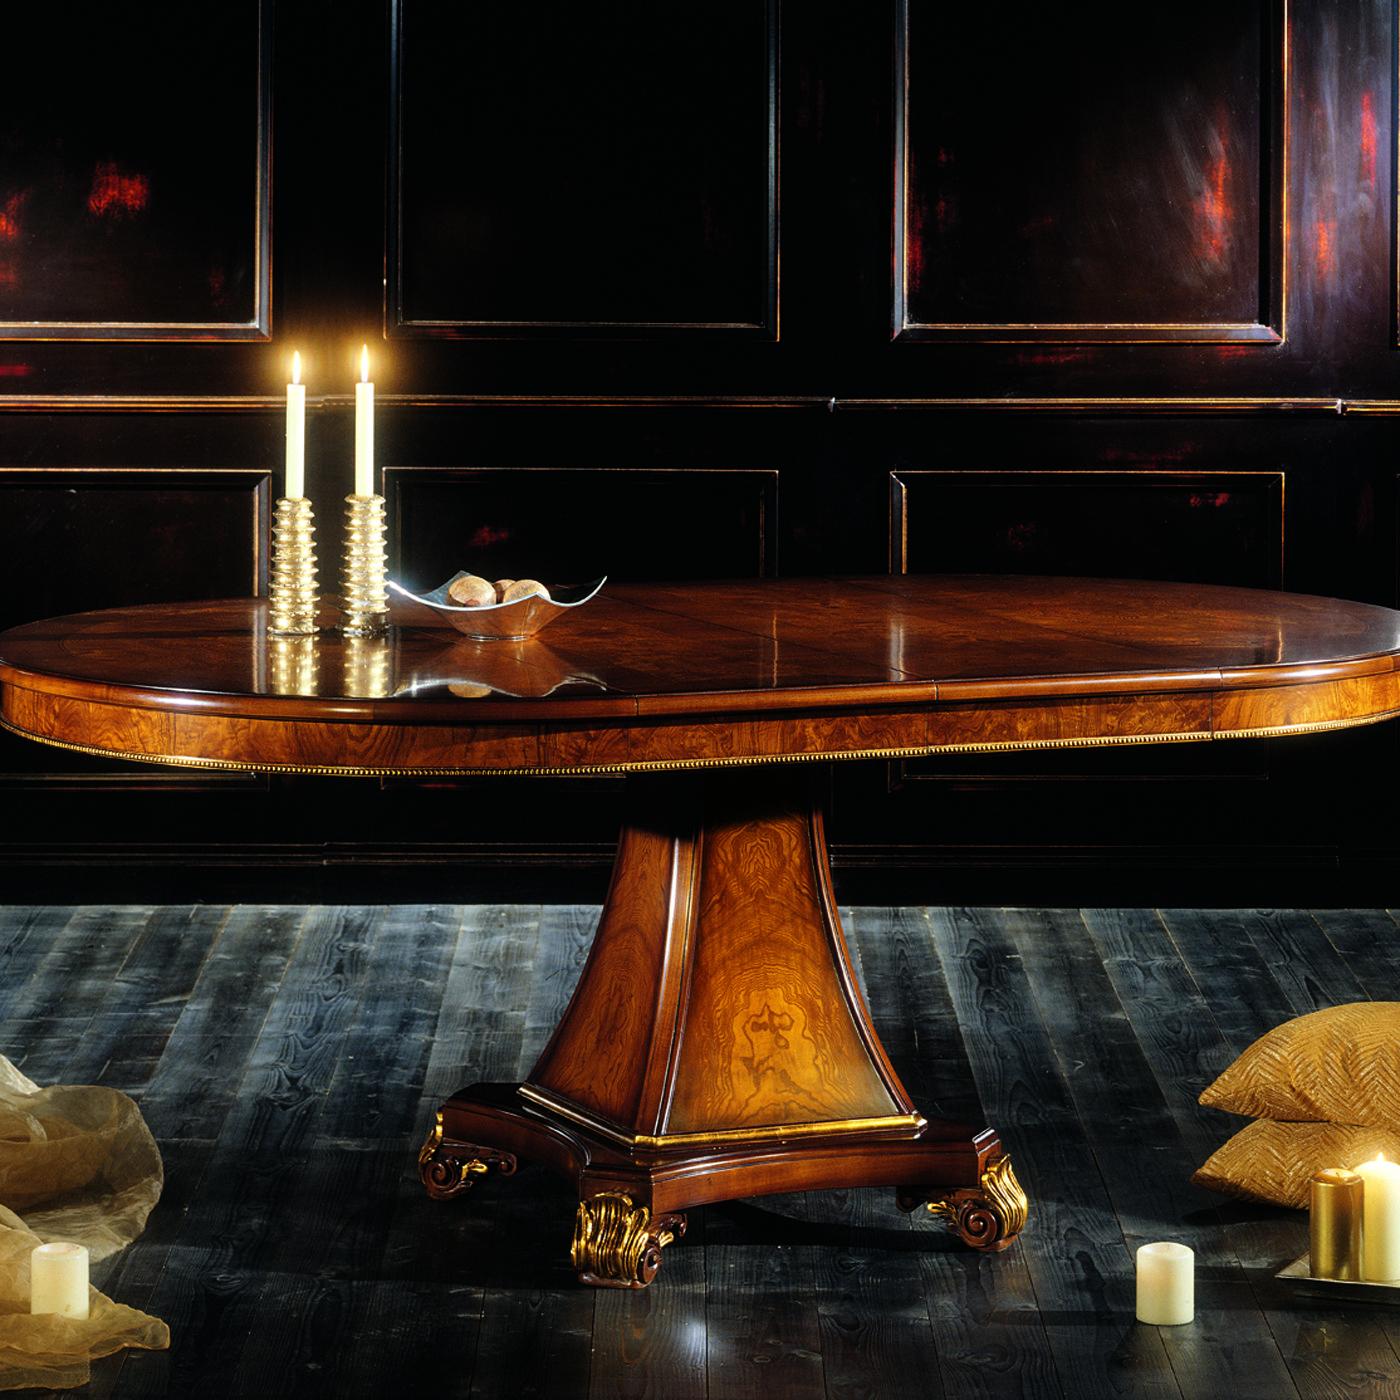 This extendable table boasts walnut veneer and ash burl. The pedestal base has a faceted sloped silhouette raised on a platform with four ornate feet. The round top measures 120 cm and features a linear inlay in bois de rose and a semi-gloss finish